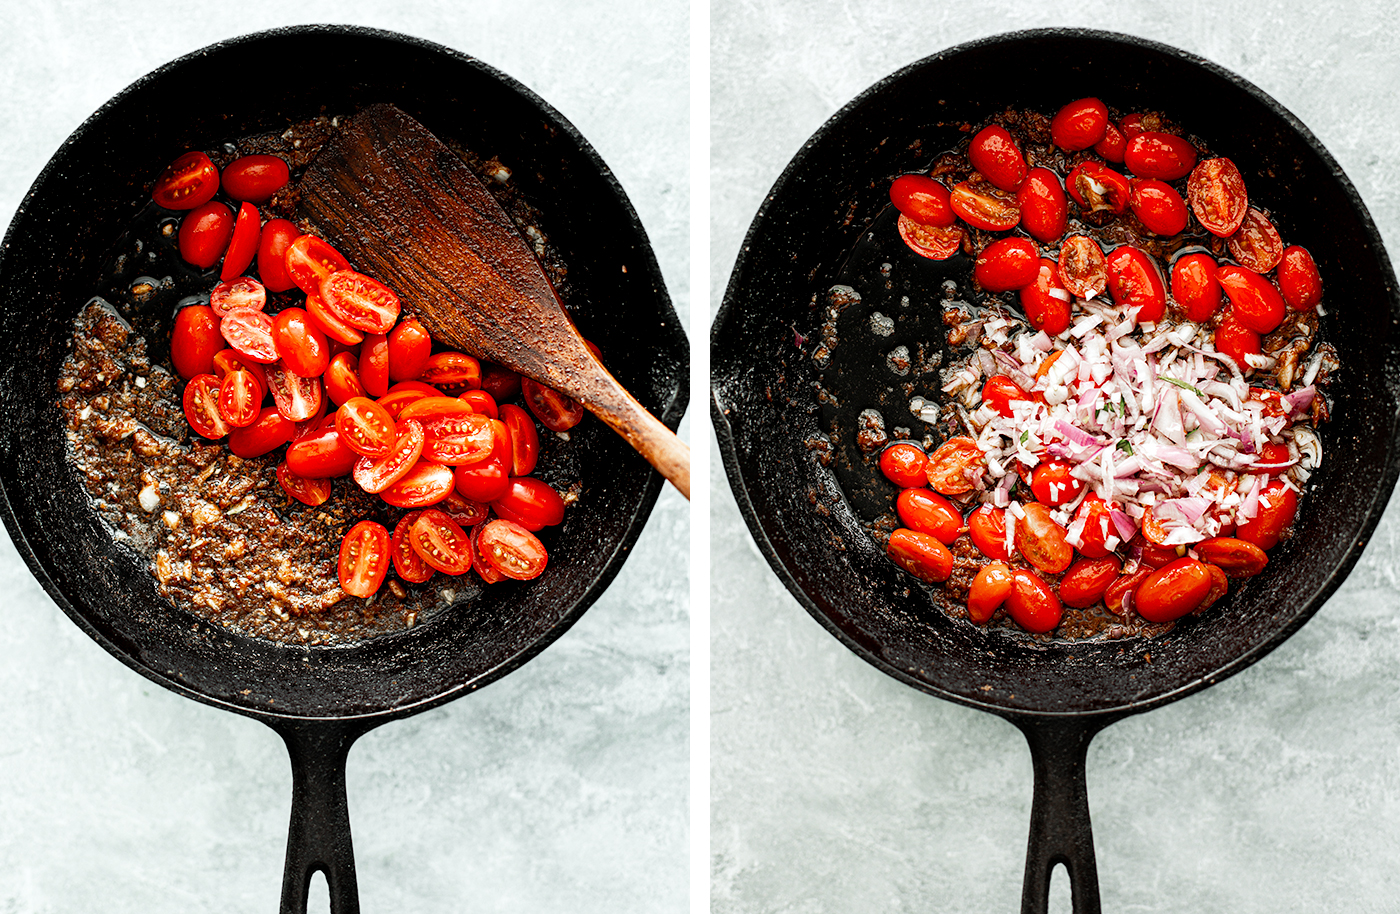 Cast iron skillet process shots: fresh tomatoes, then burst tomatoes with shallots.